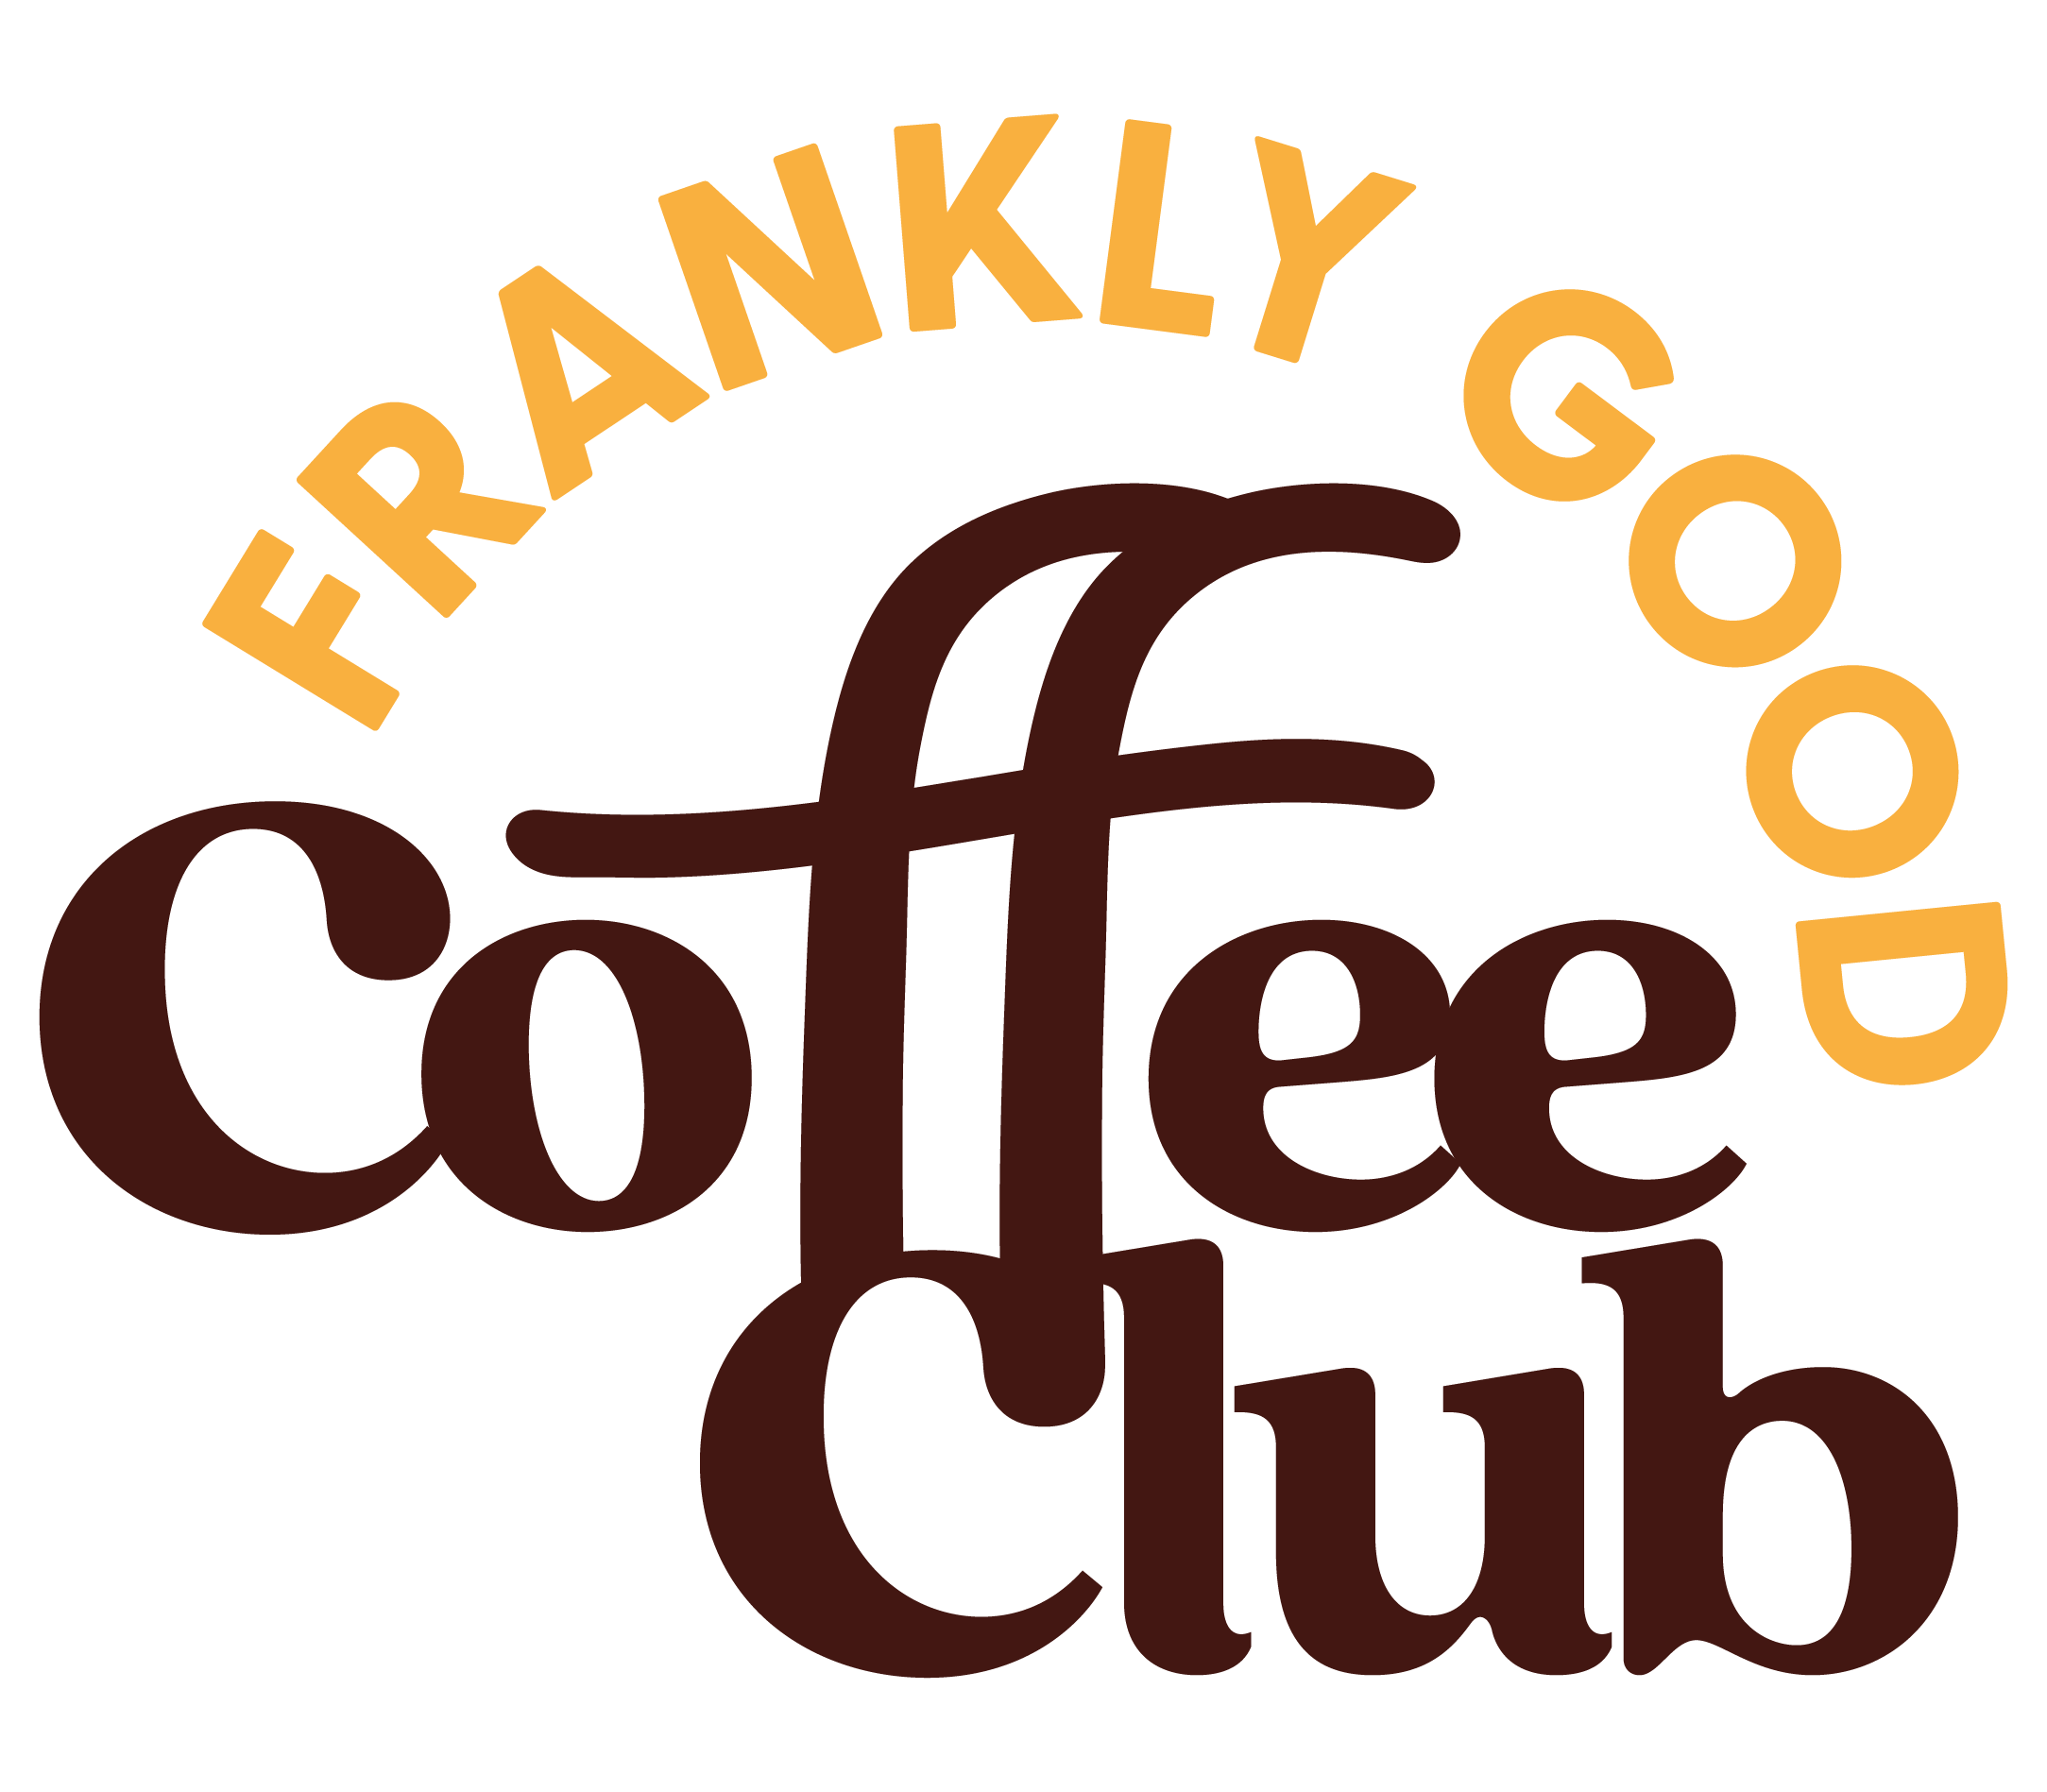 frankly-good-coffee-rgb-coffee-club-logo-full-colorhigh-res.png